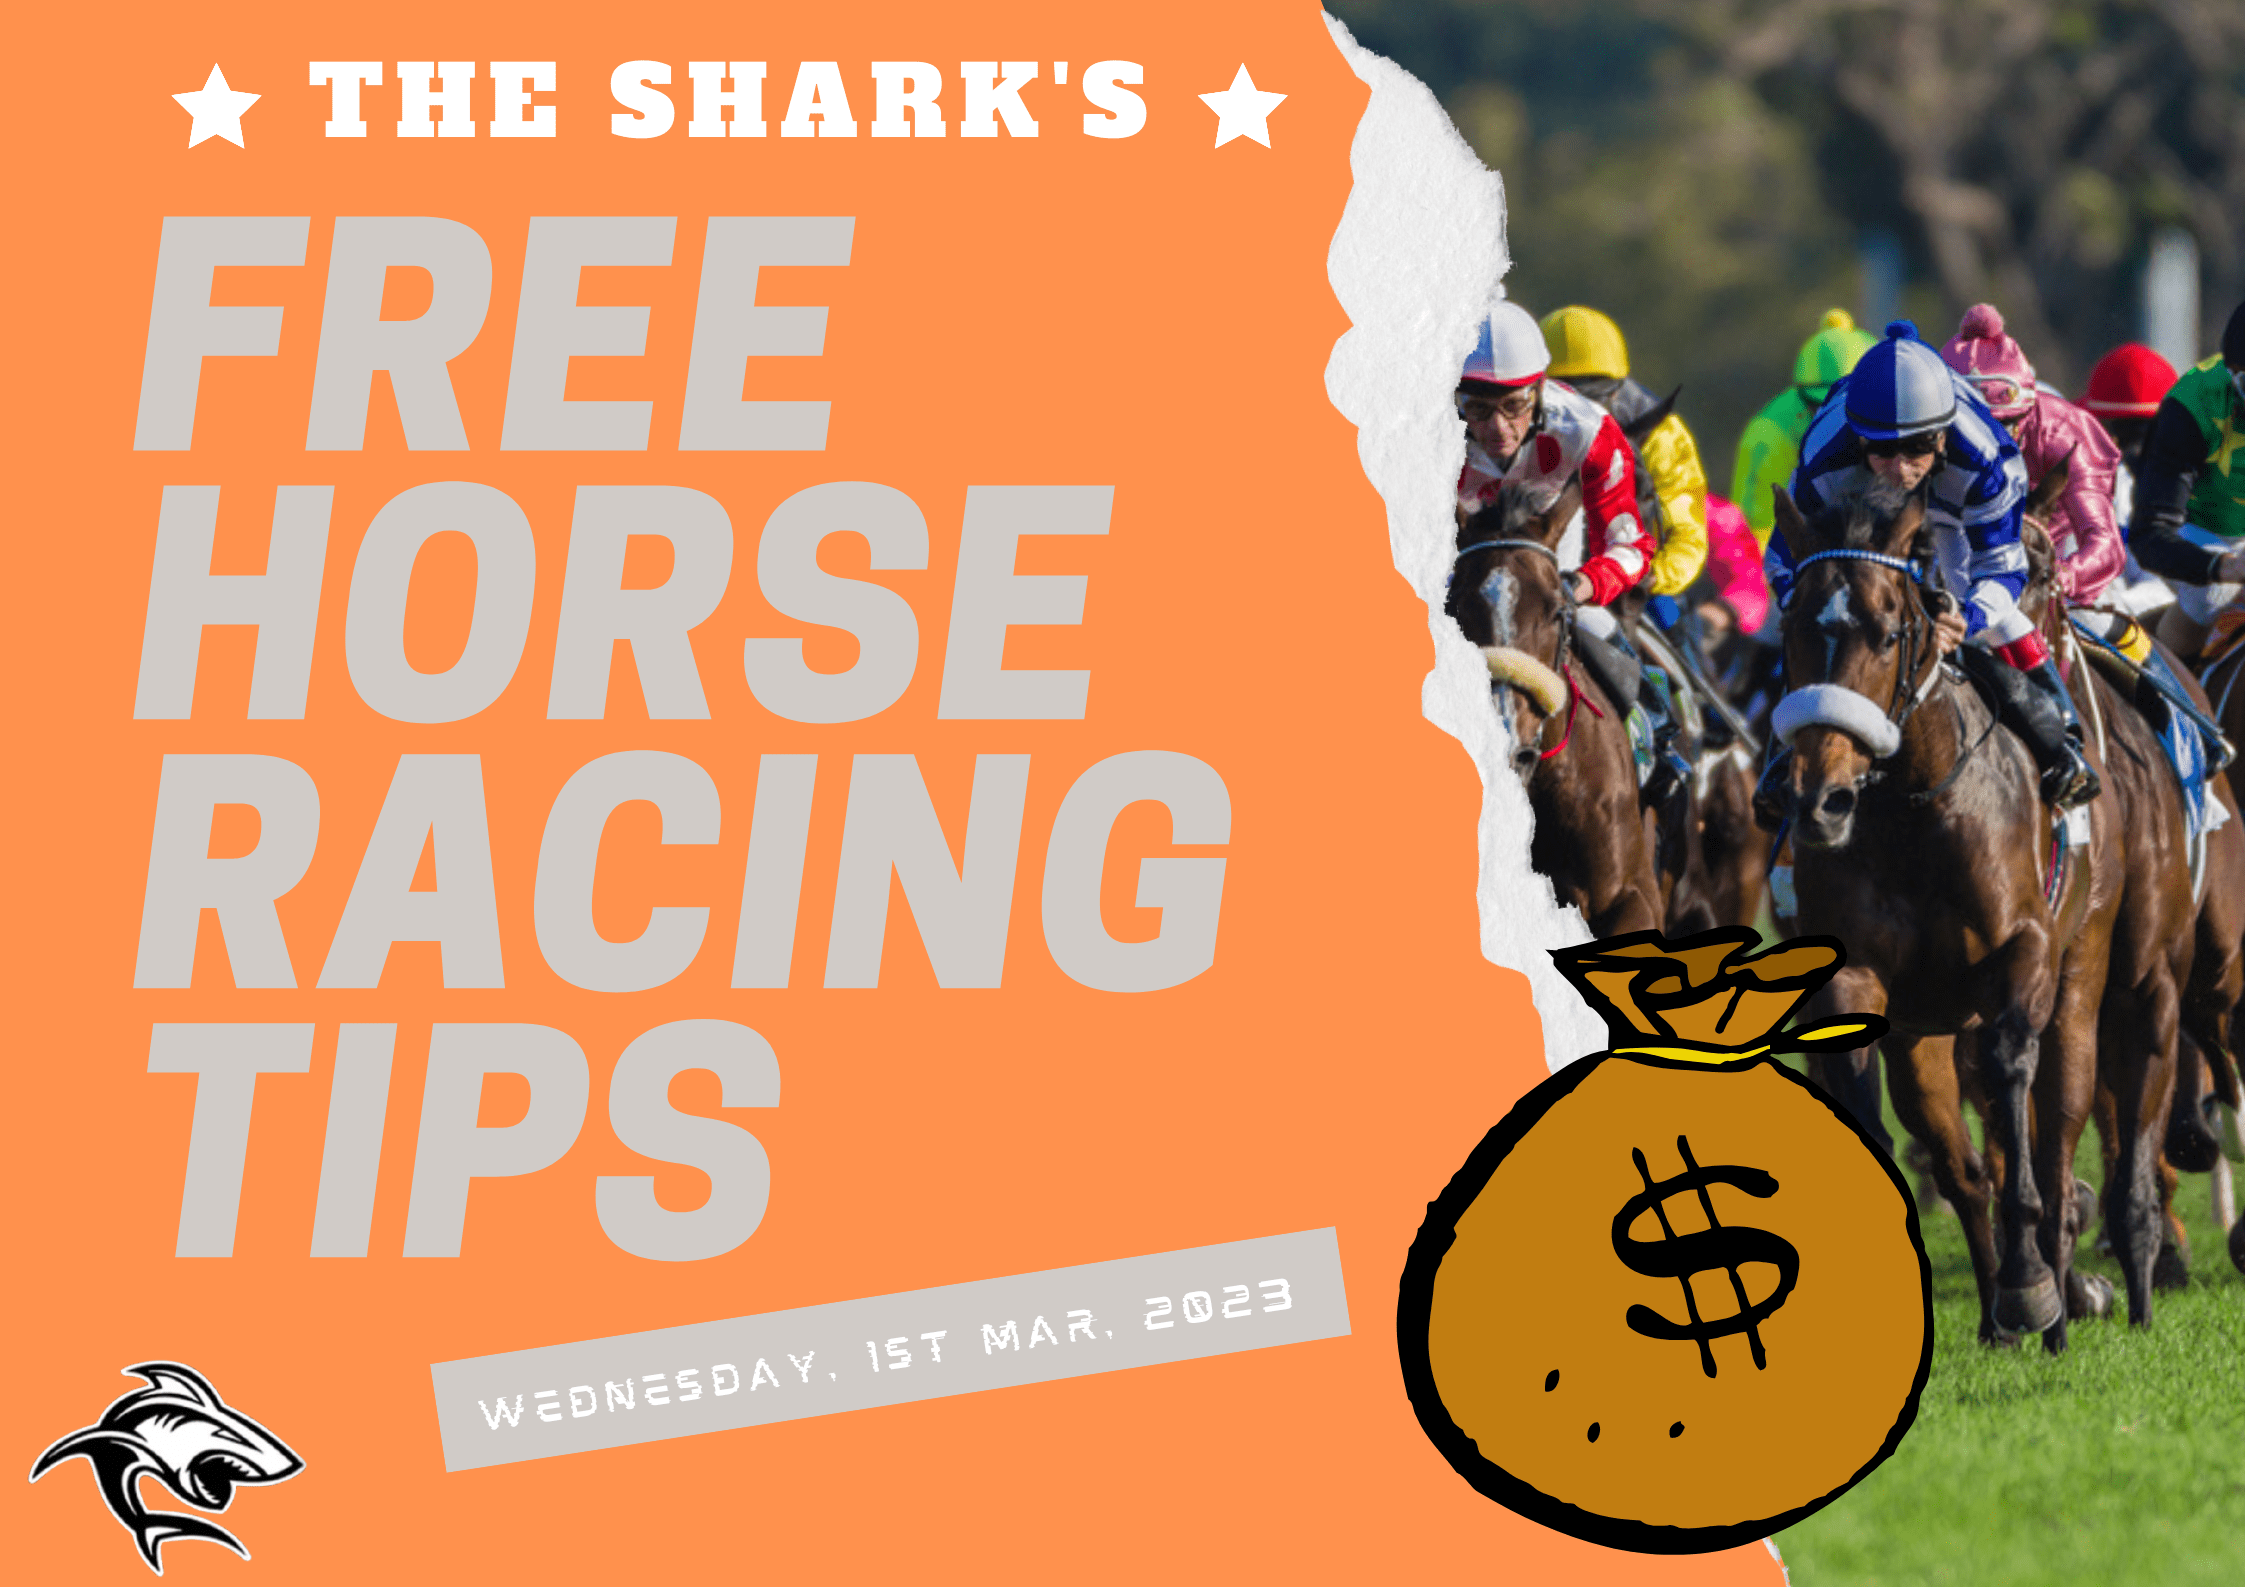 Free Horse Racing Tips - 1st Mar